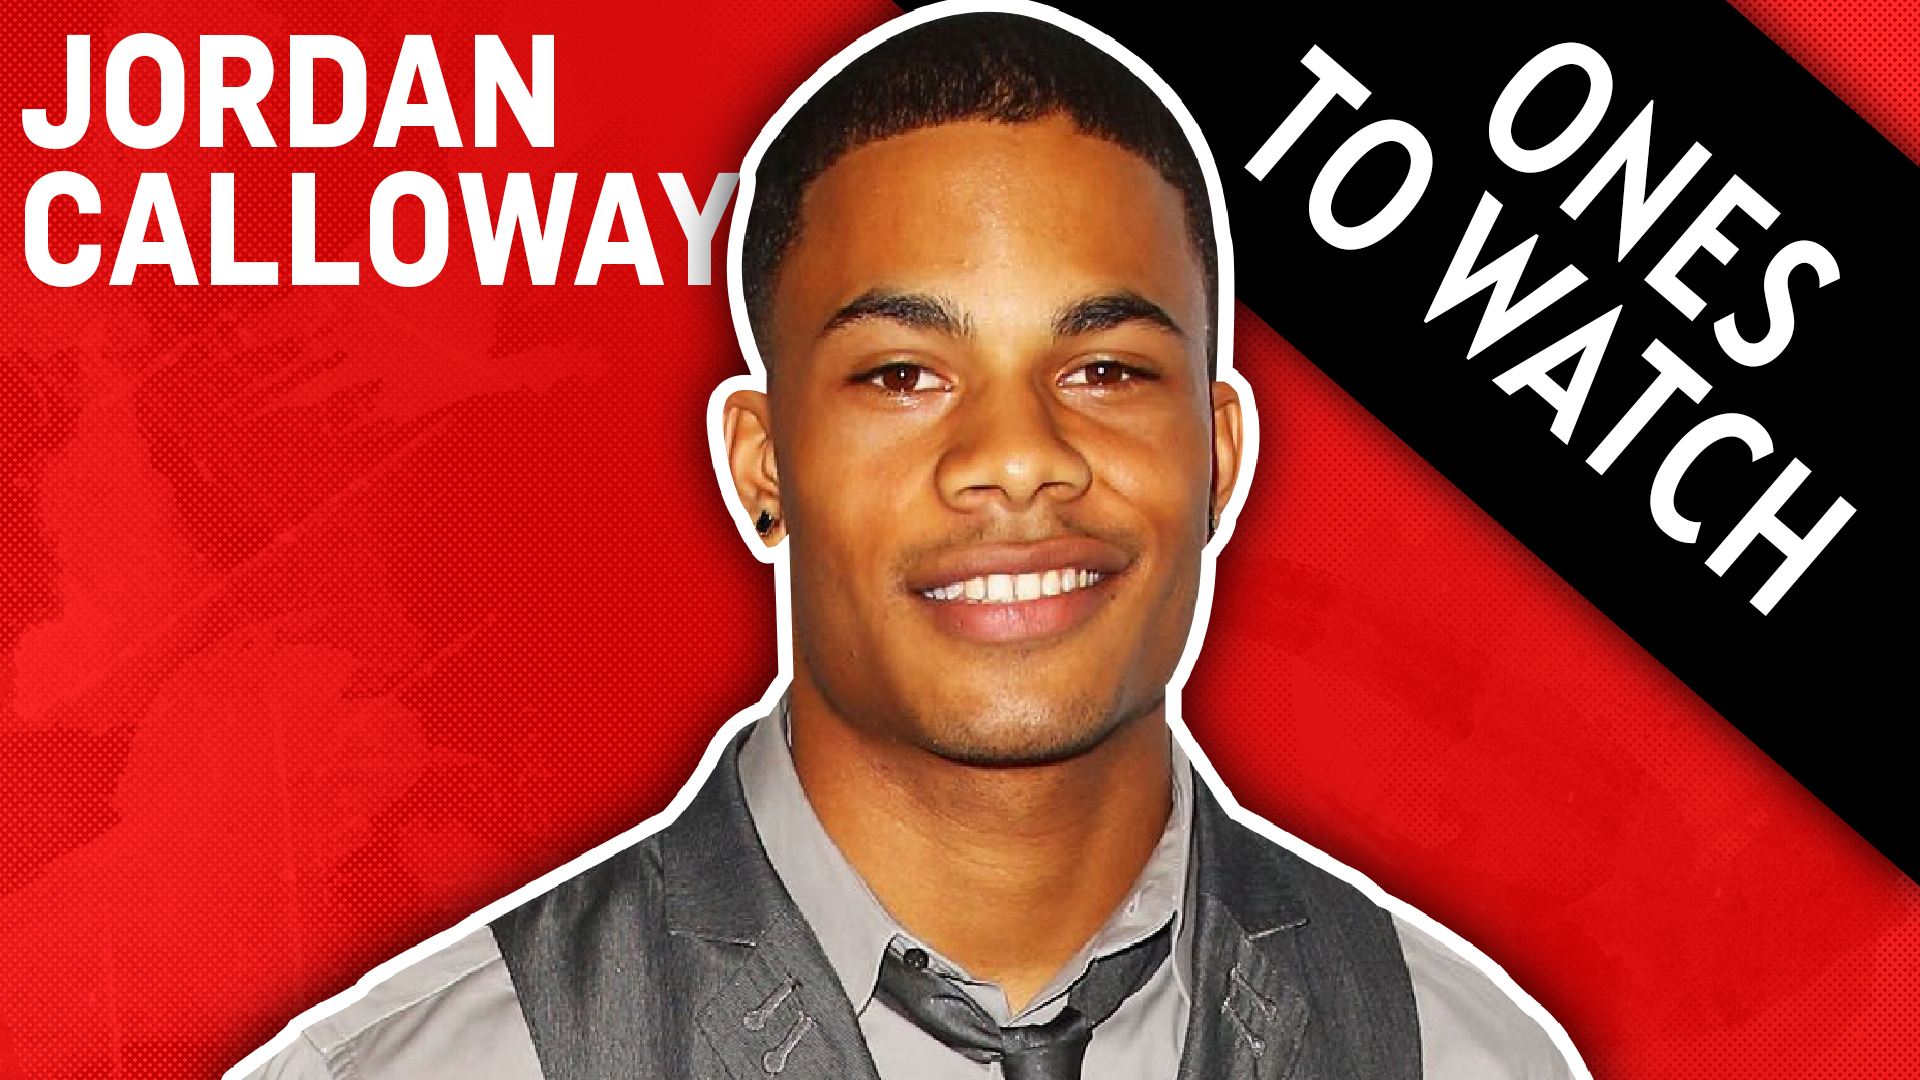 Jordan Calloway on How BLM Changed Television to Watch